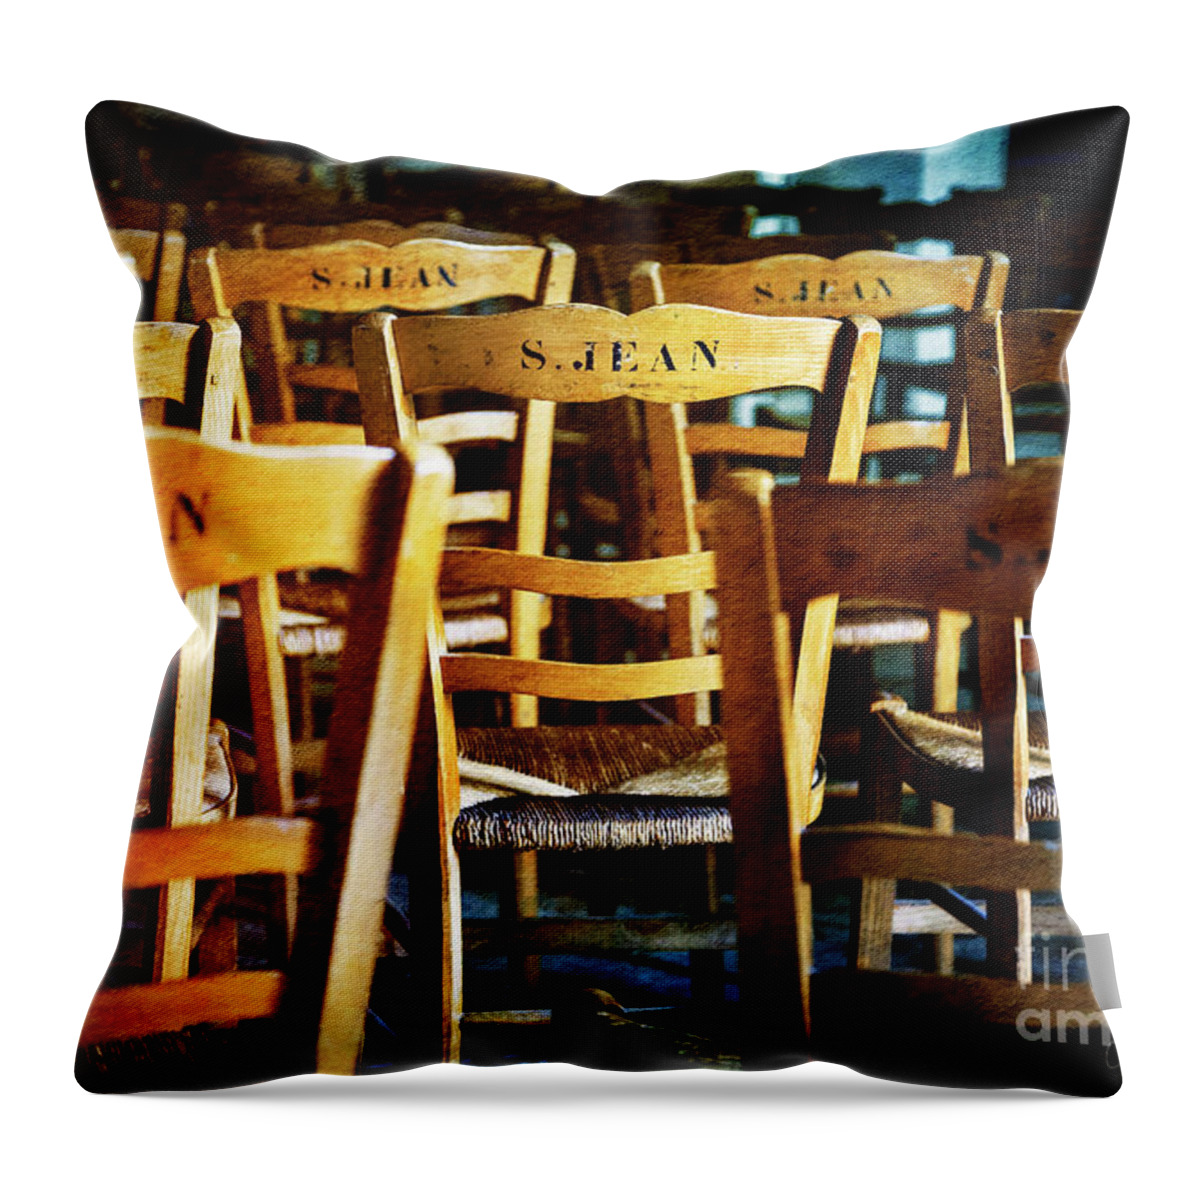 France Throw Pillow featuring the photograph Givenry's S.Jean Church Chair by Craig J Satterlee